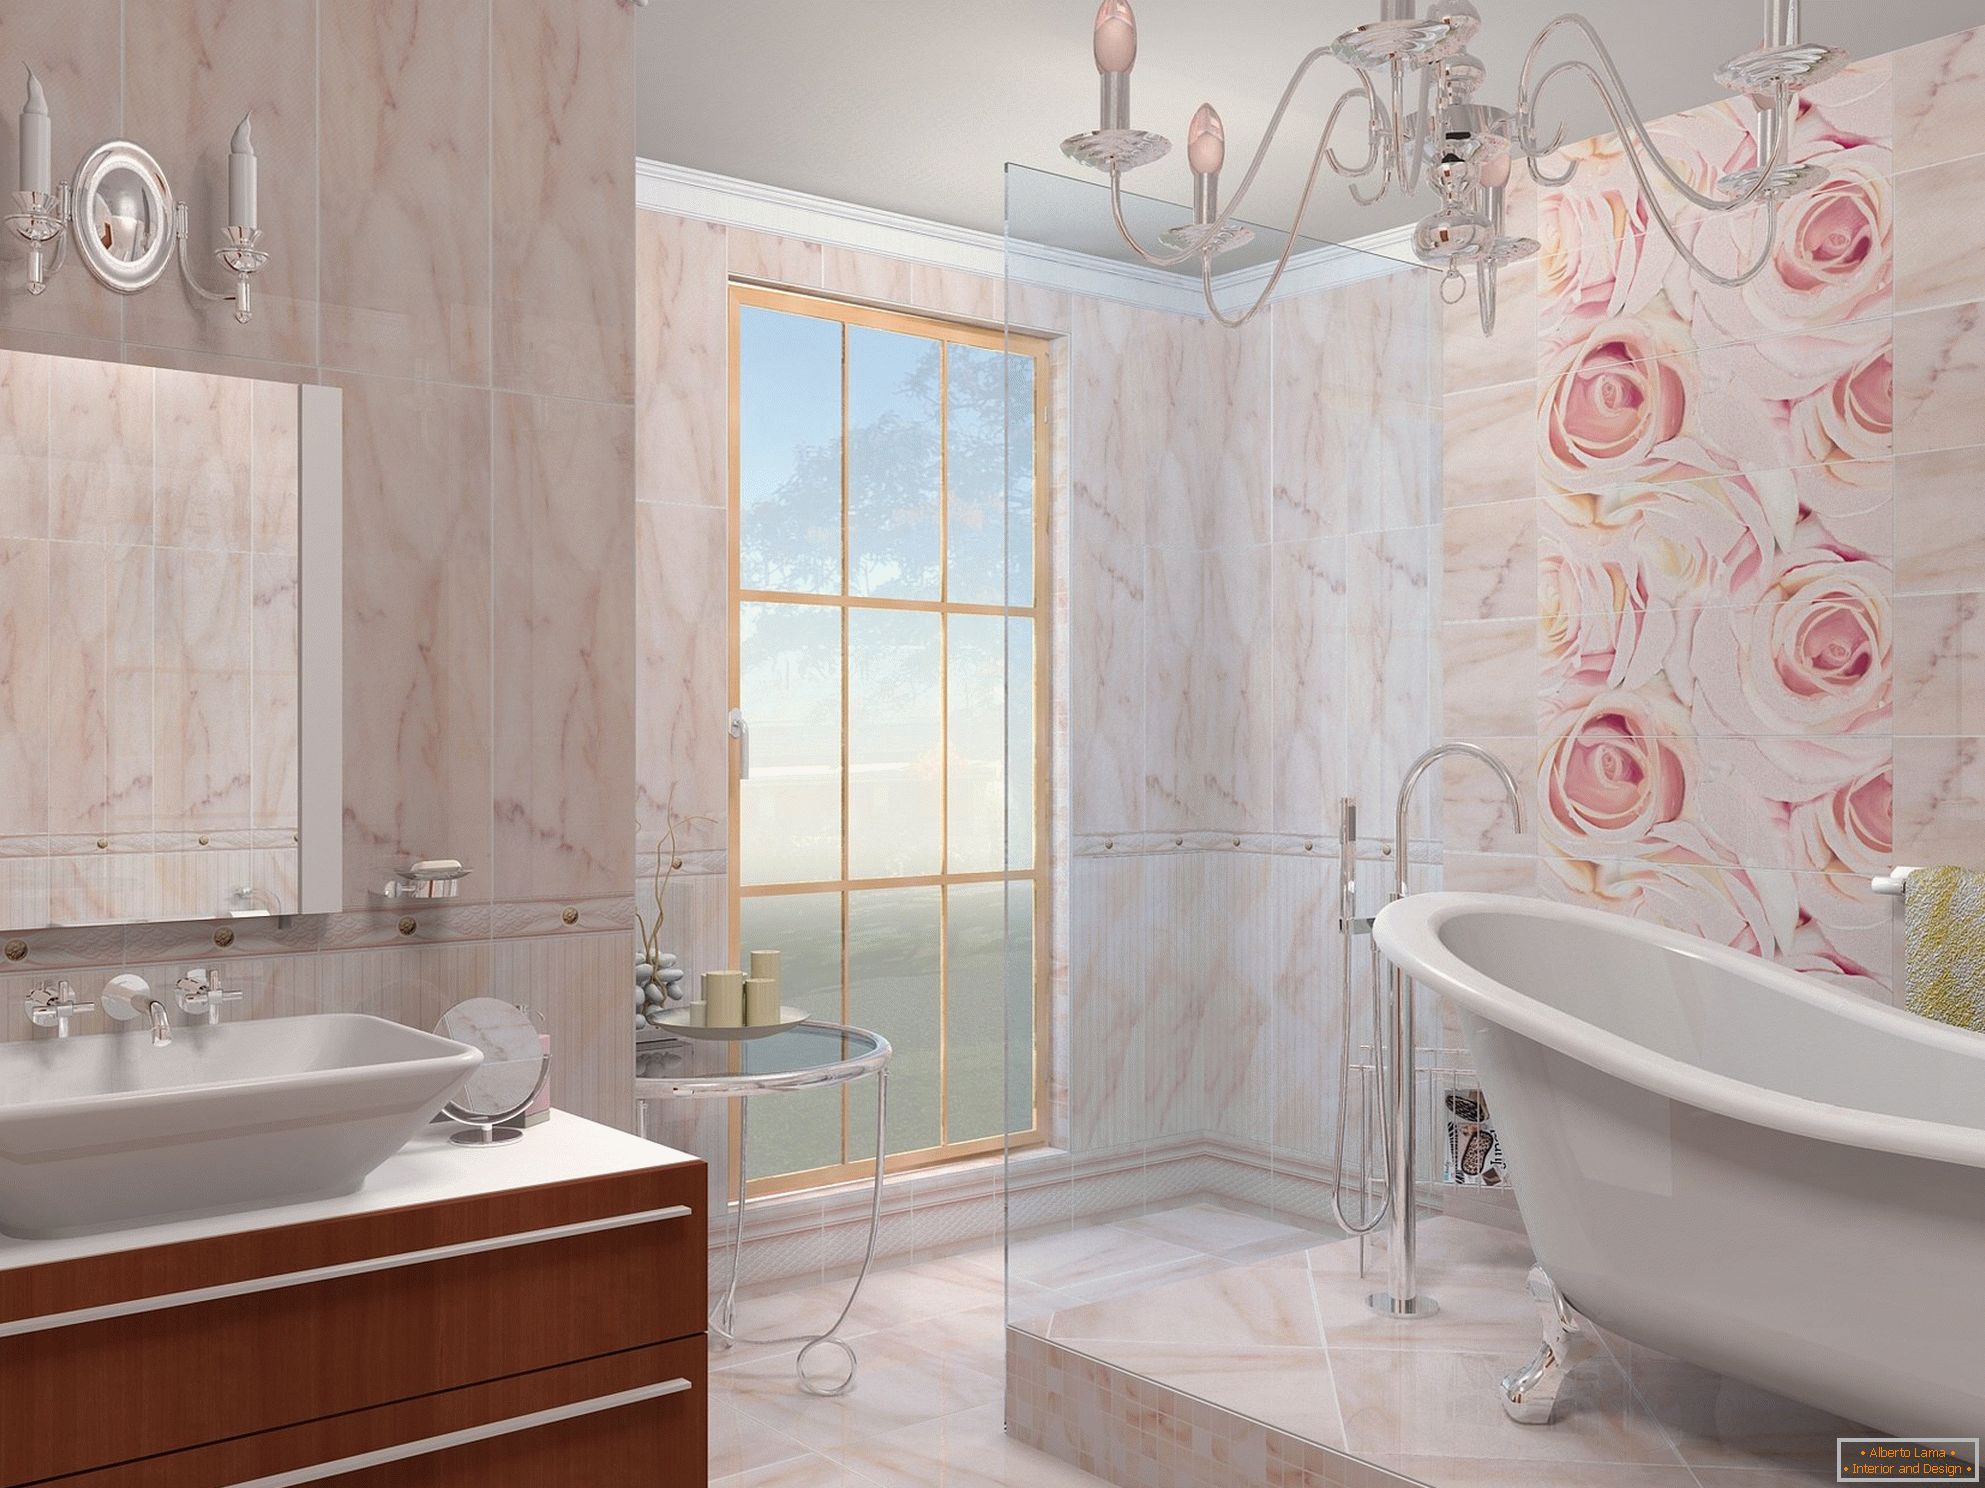 The combination of beige and pink in the design of the bathroom